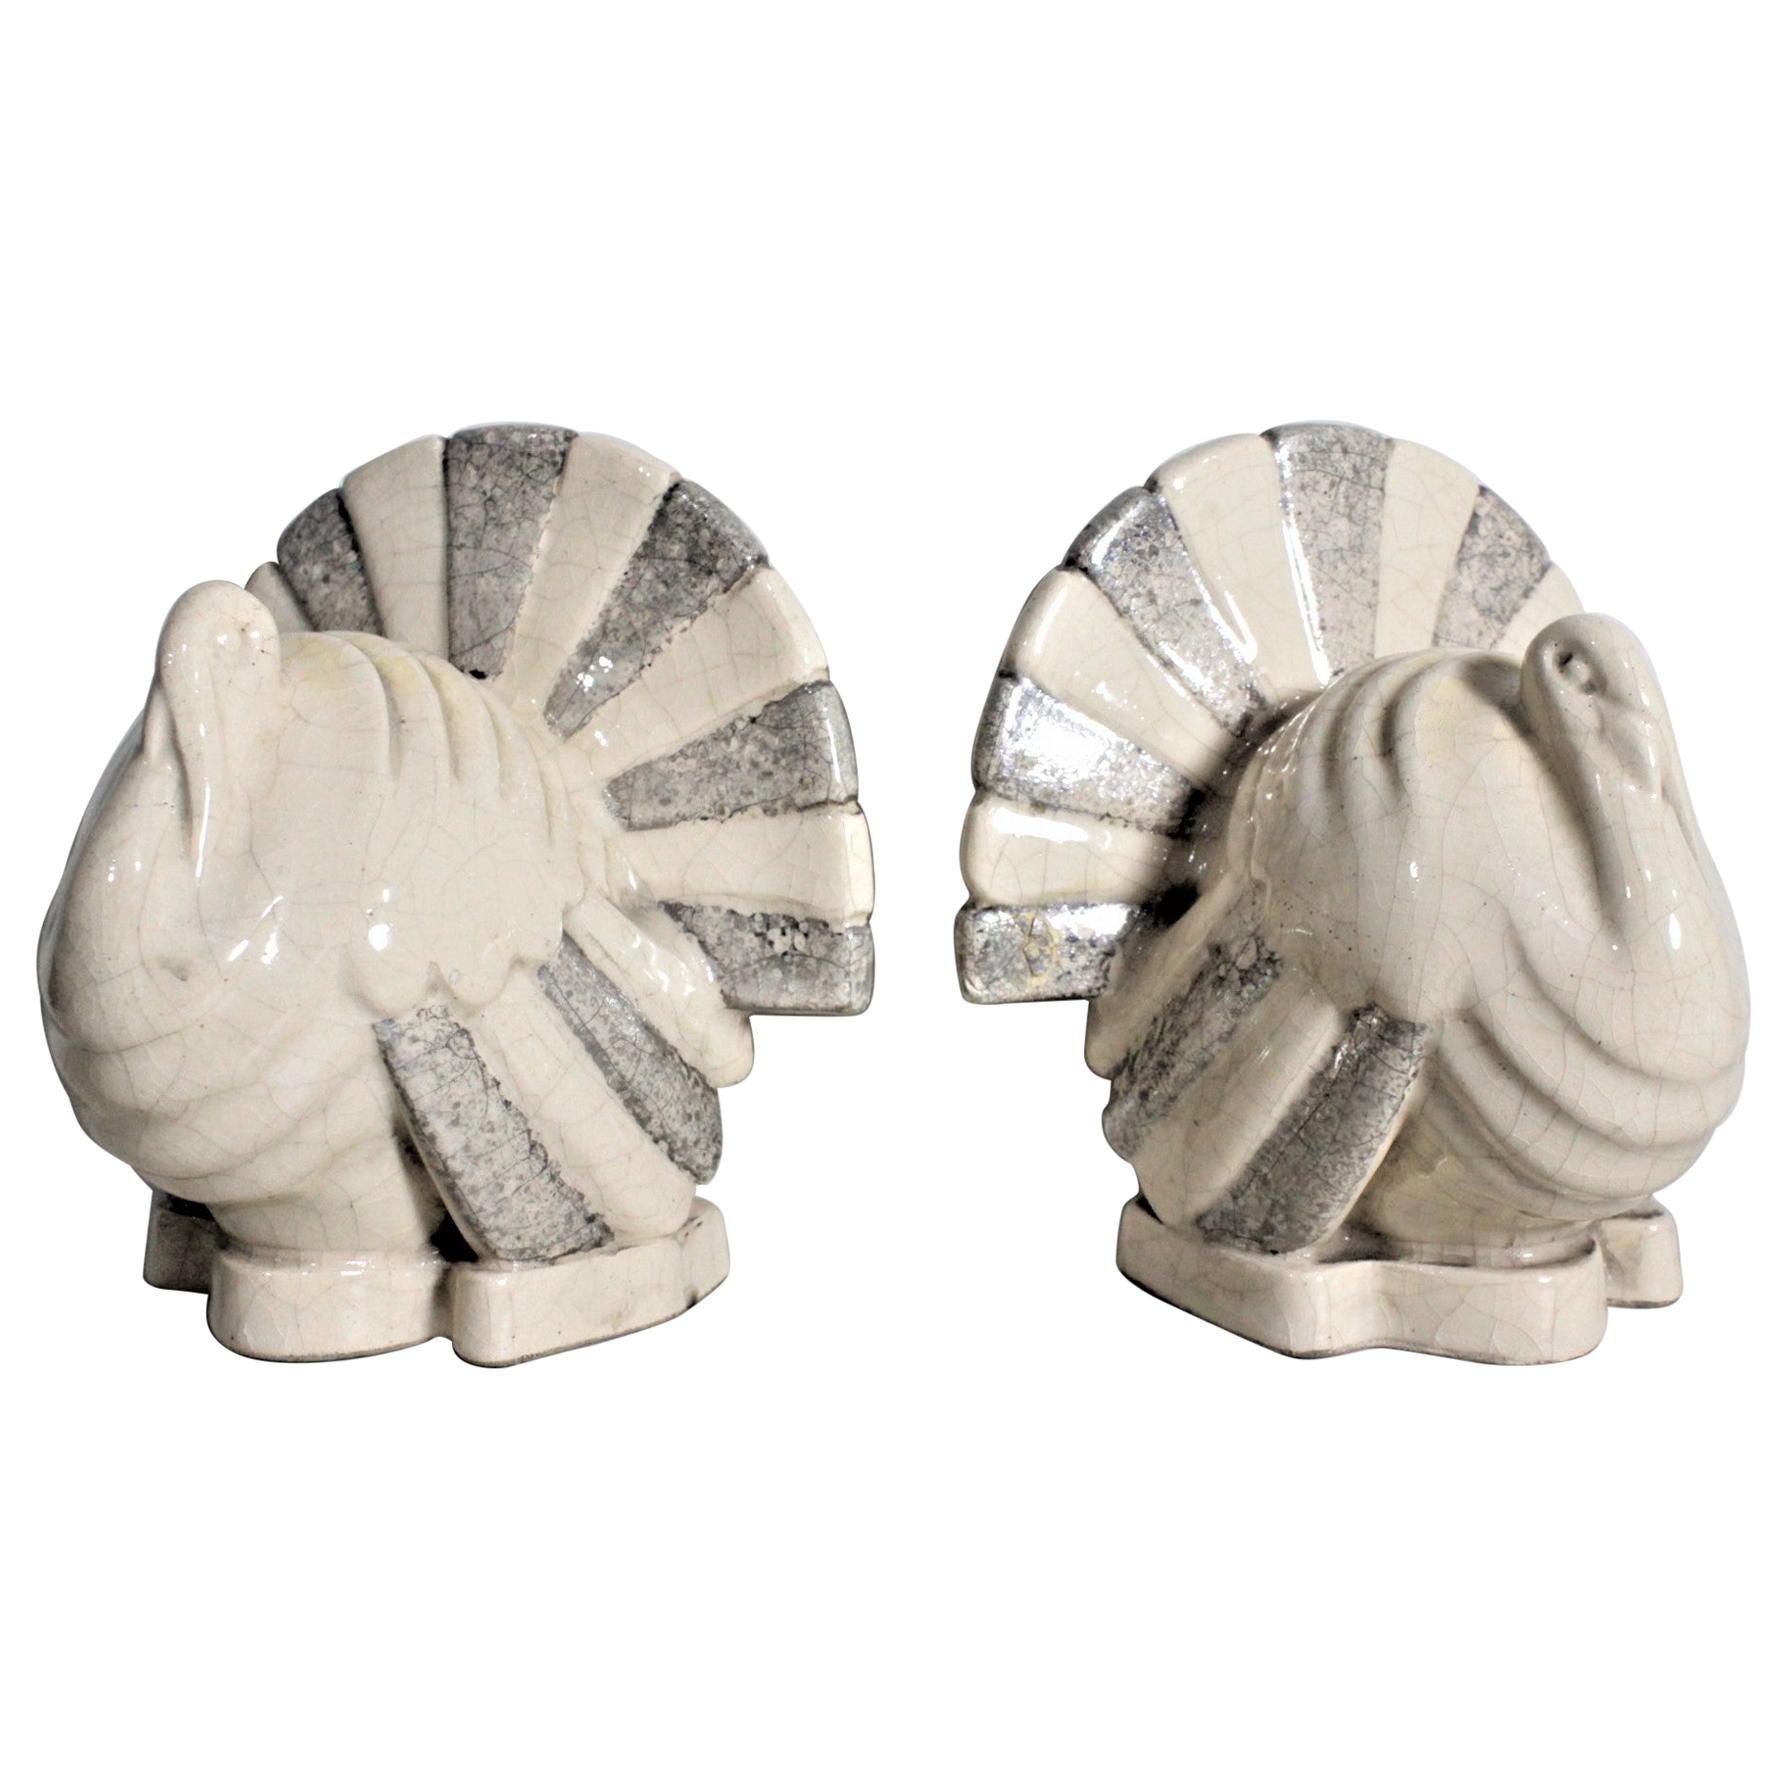 Art Deco Figural Ceramic Turkey Bookends in Taupe and Charcoal Grey Luster Glaze For Sale